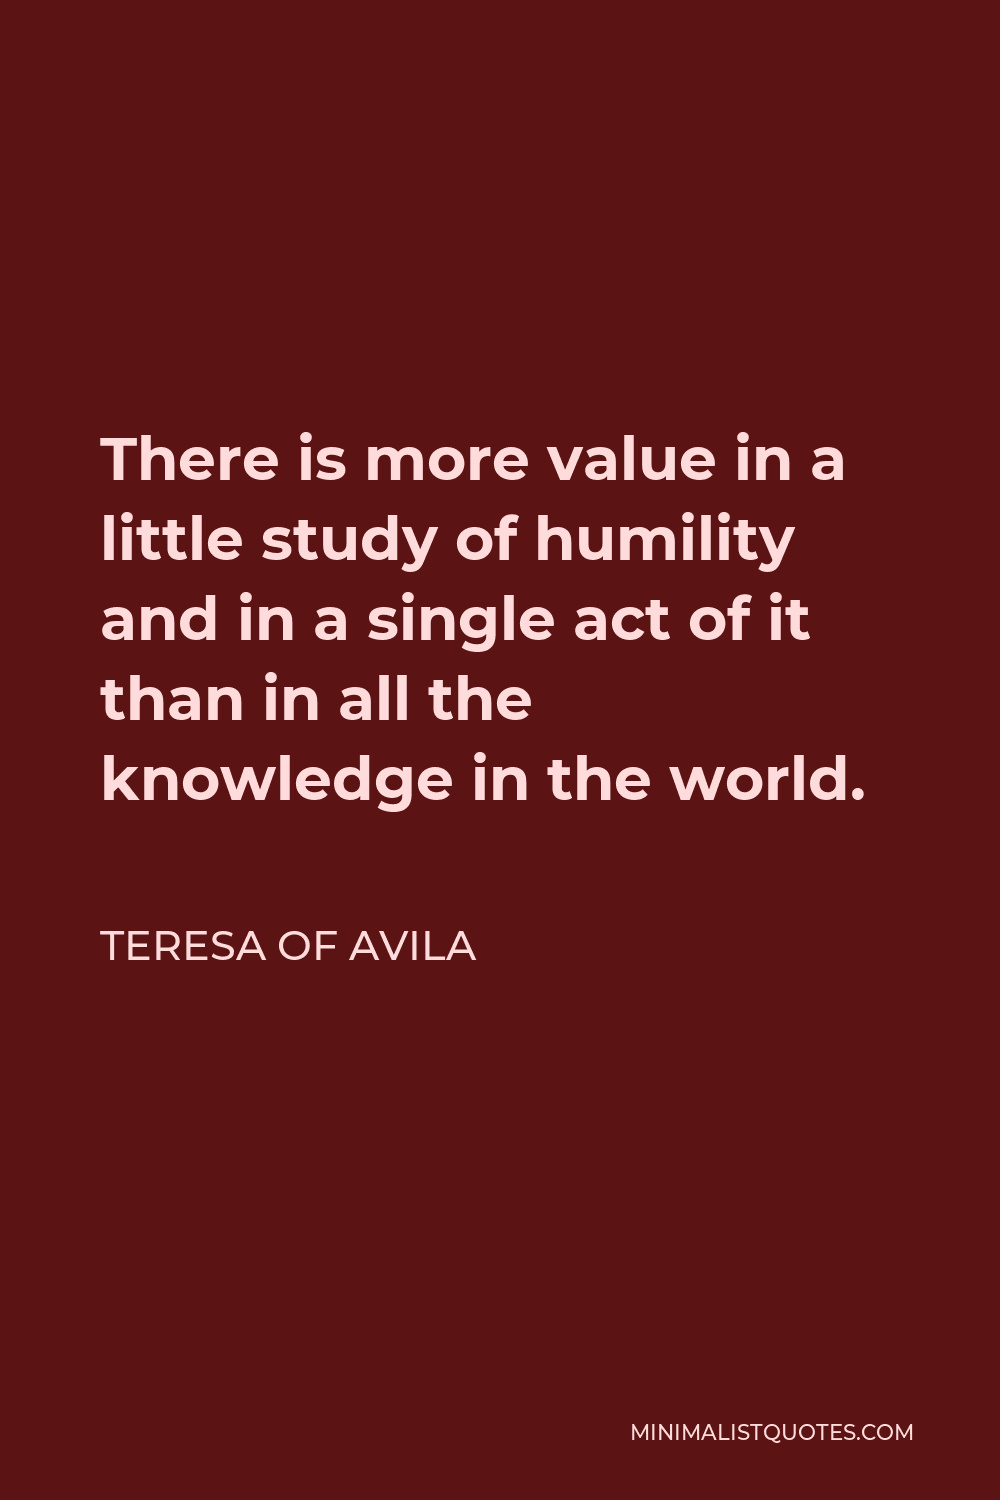 Teresa of Avila Quote - There is more value in a little study of humility and in a single act of it than in all the knowledge in the world.